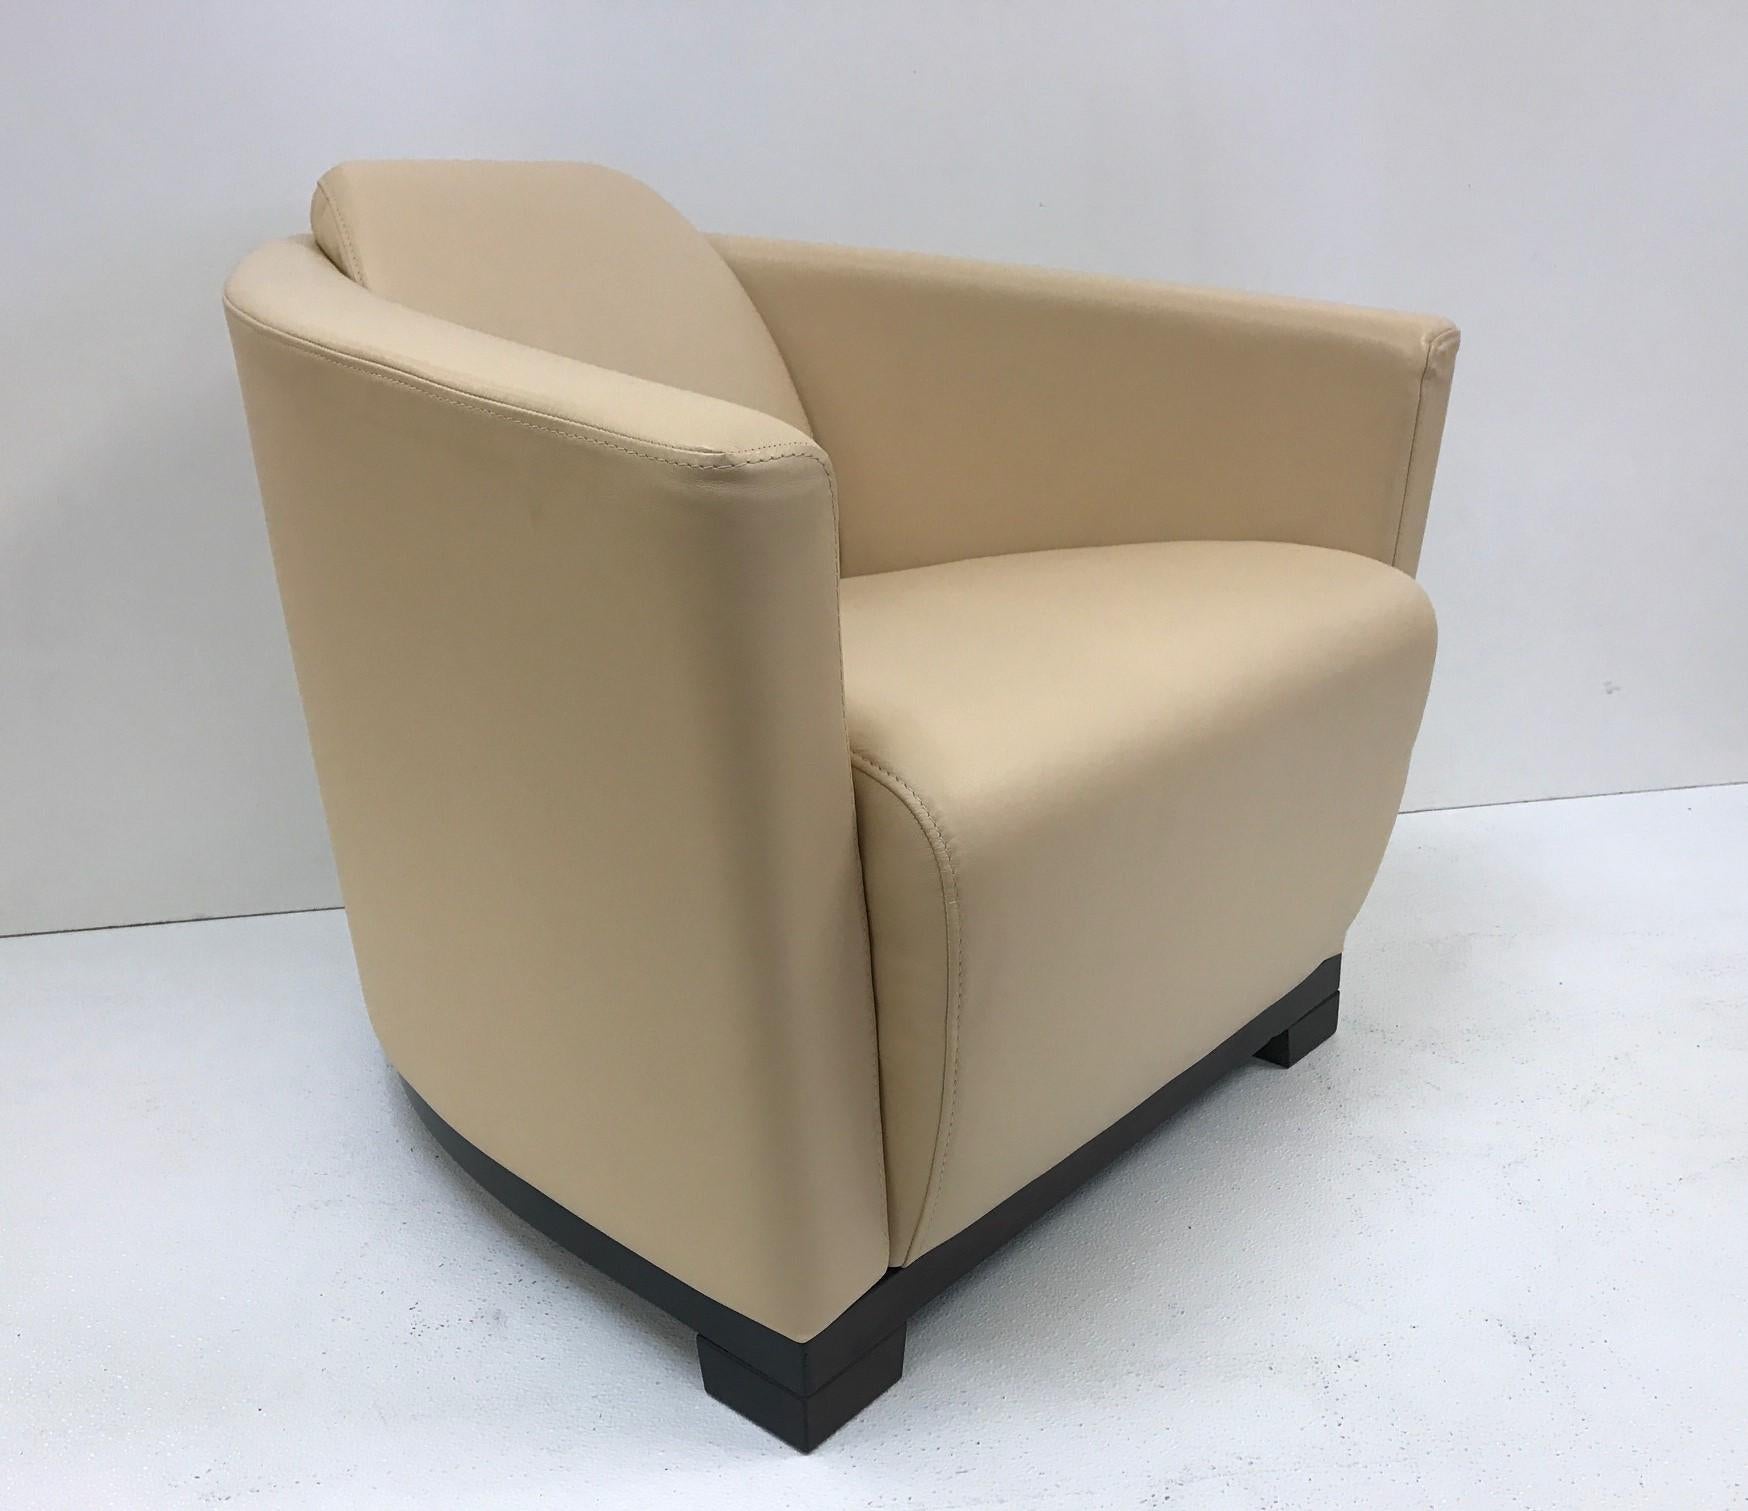 Pair of Modern Italian Leather Lounge Chairs In Good Condition For Sale In New York, NY